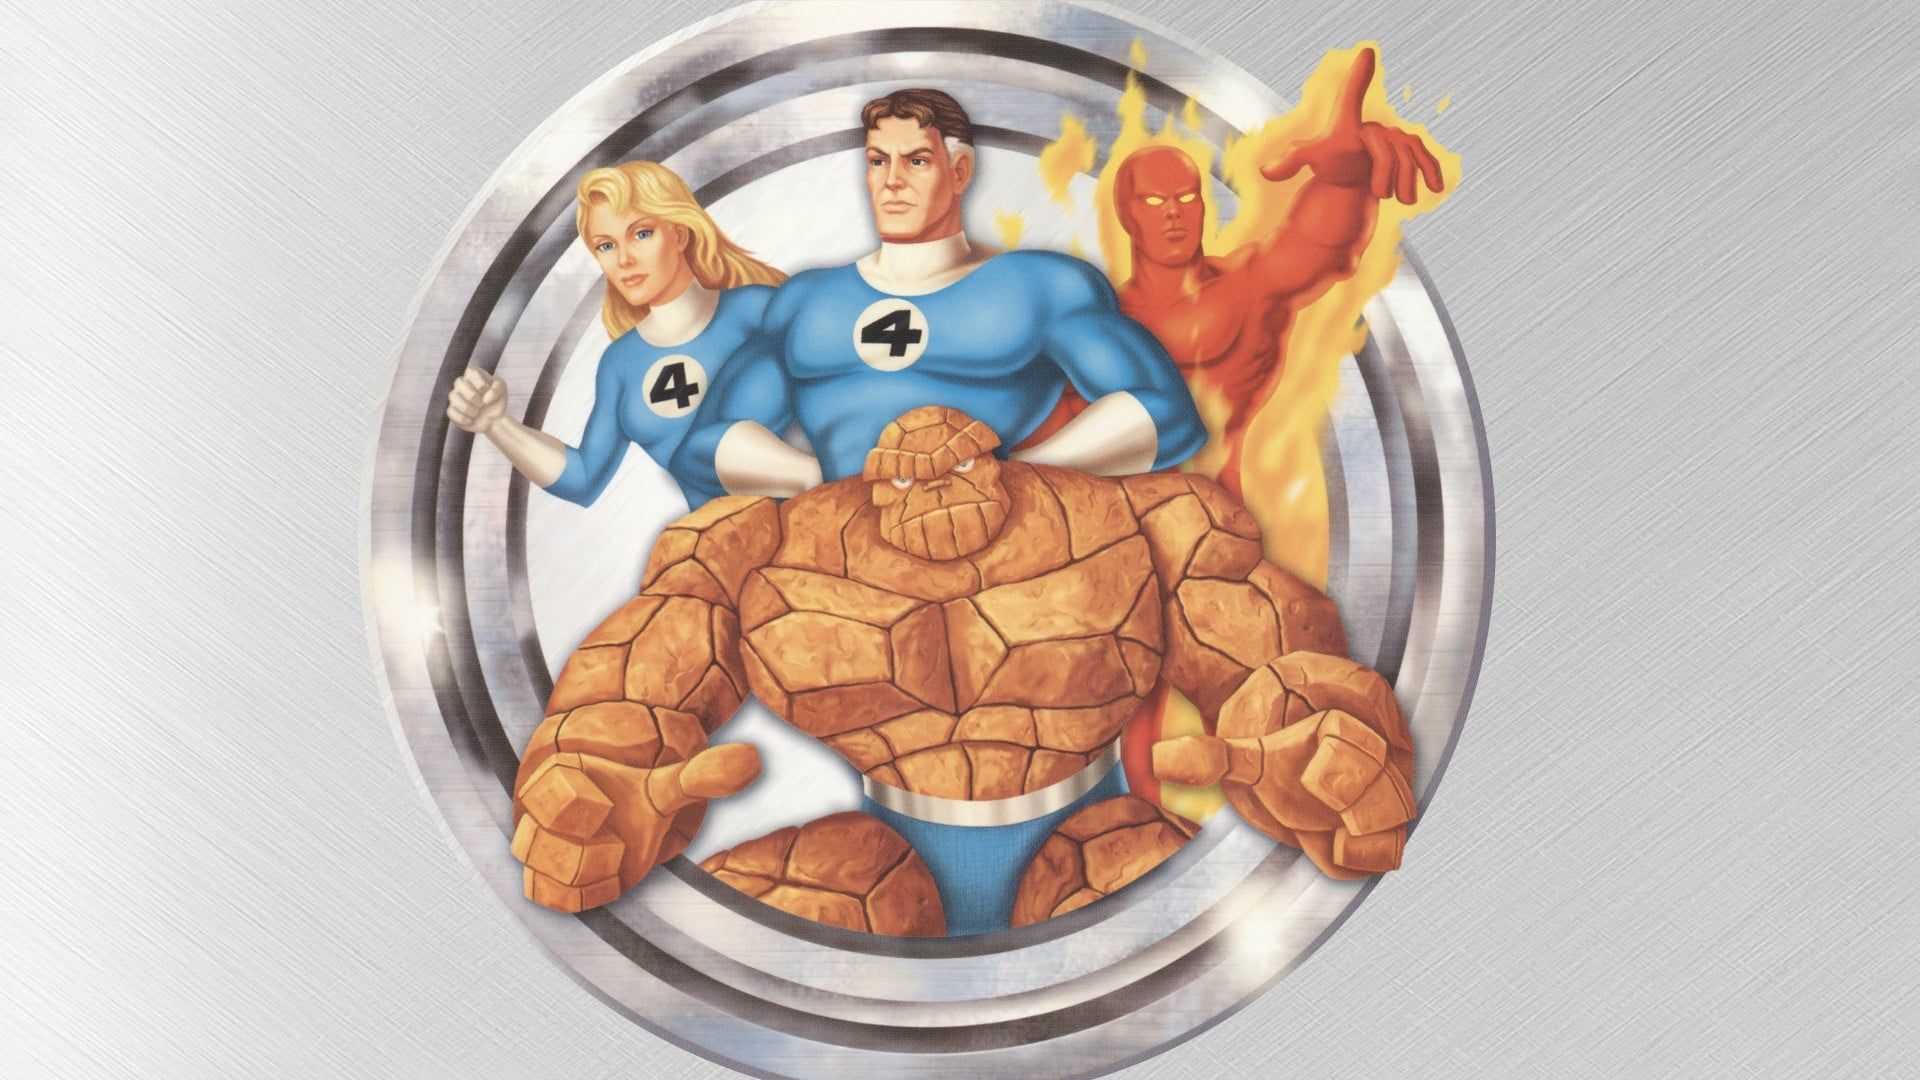 Fantastic Four: The Animated Series Backdrop